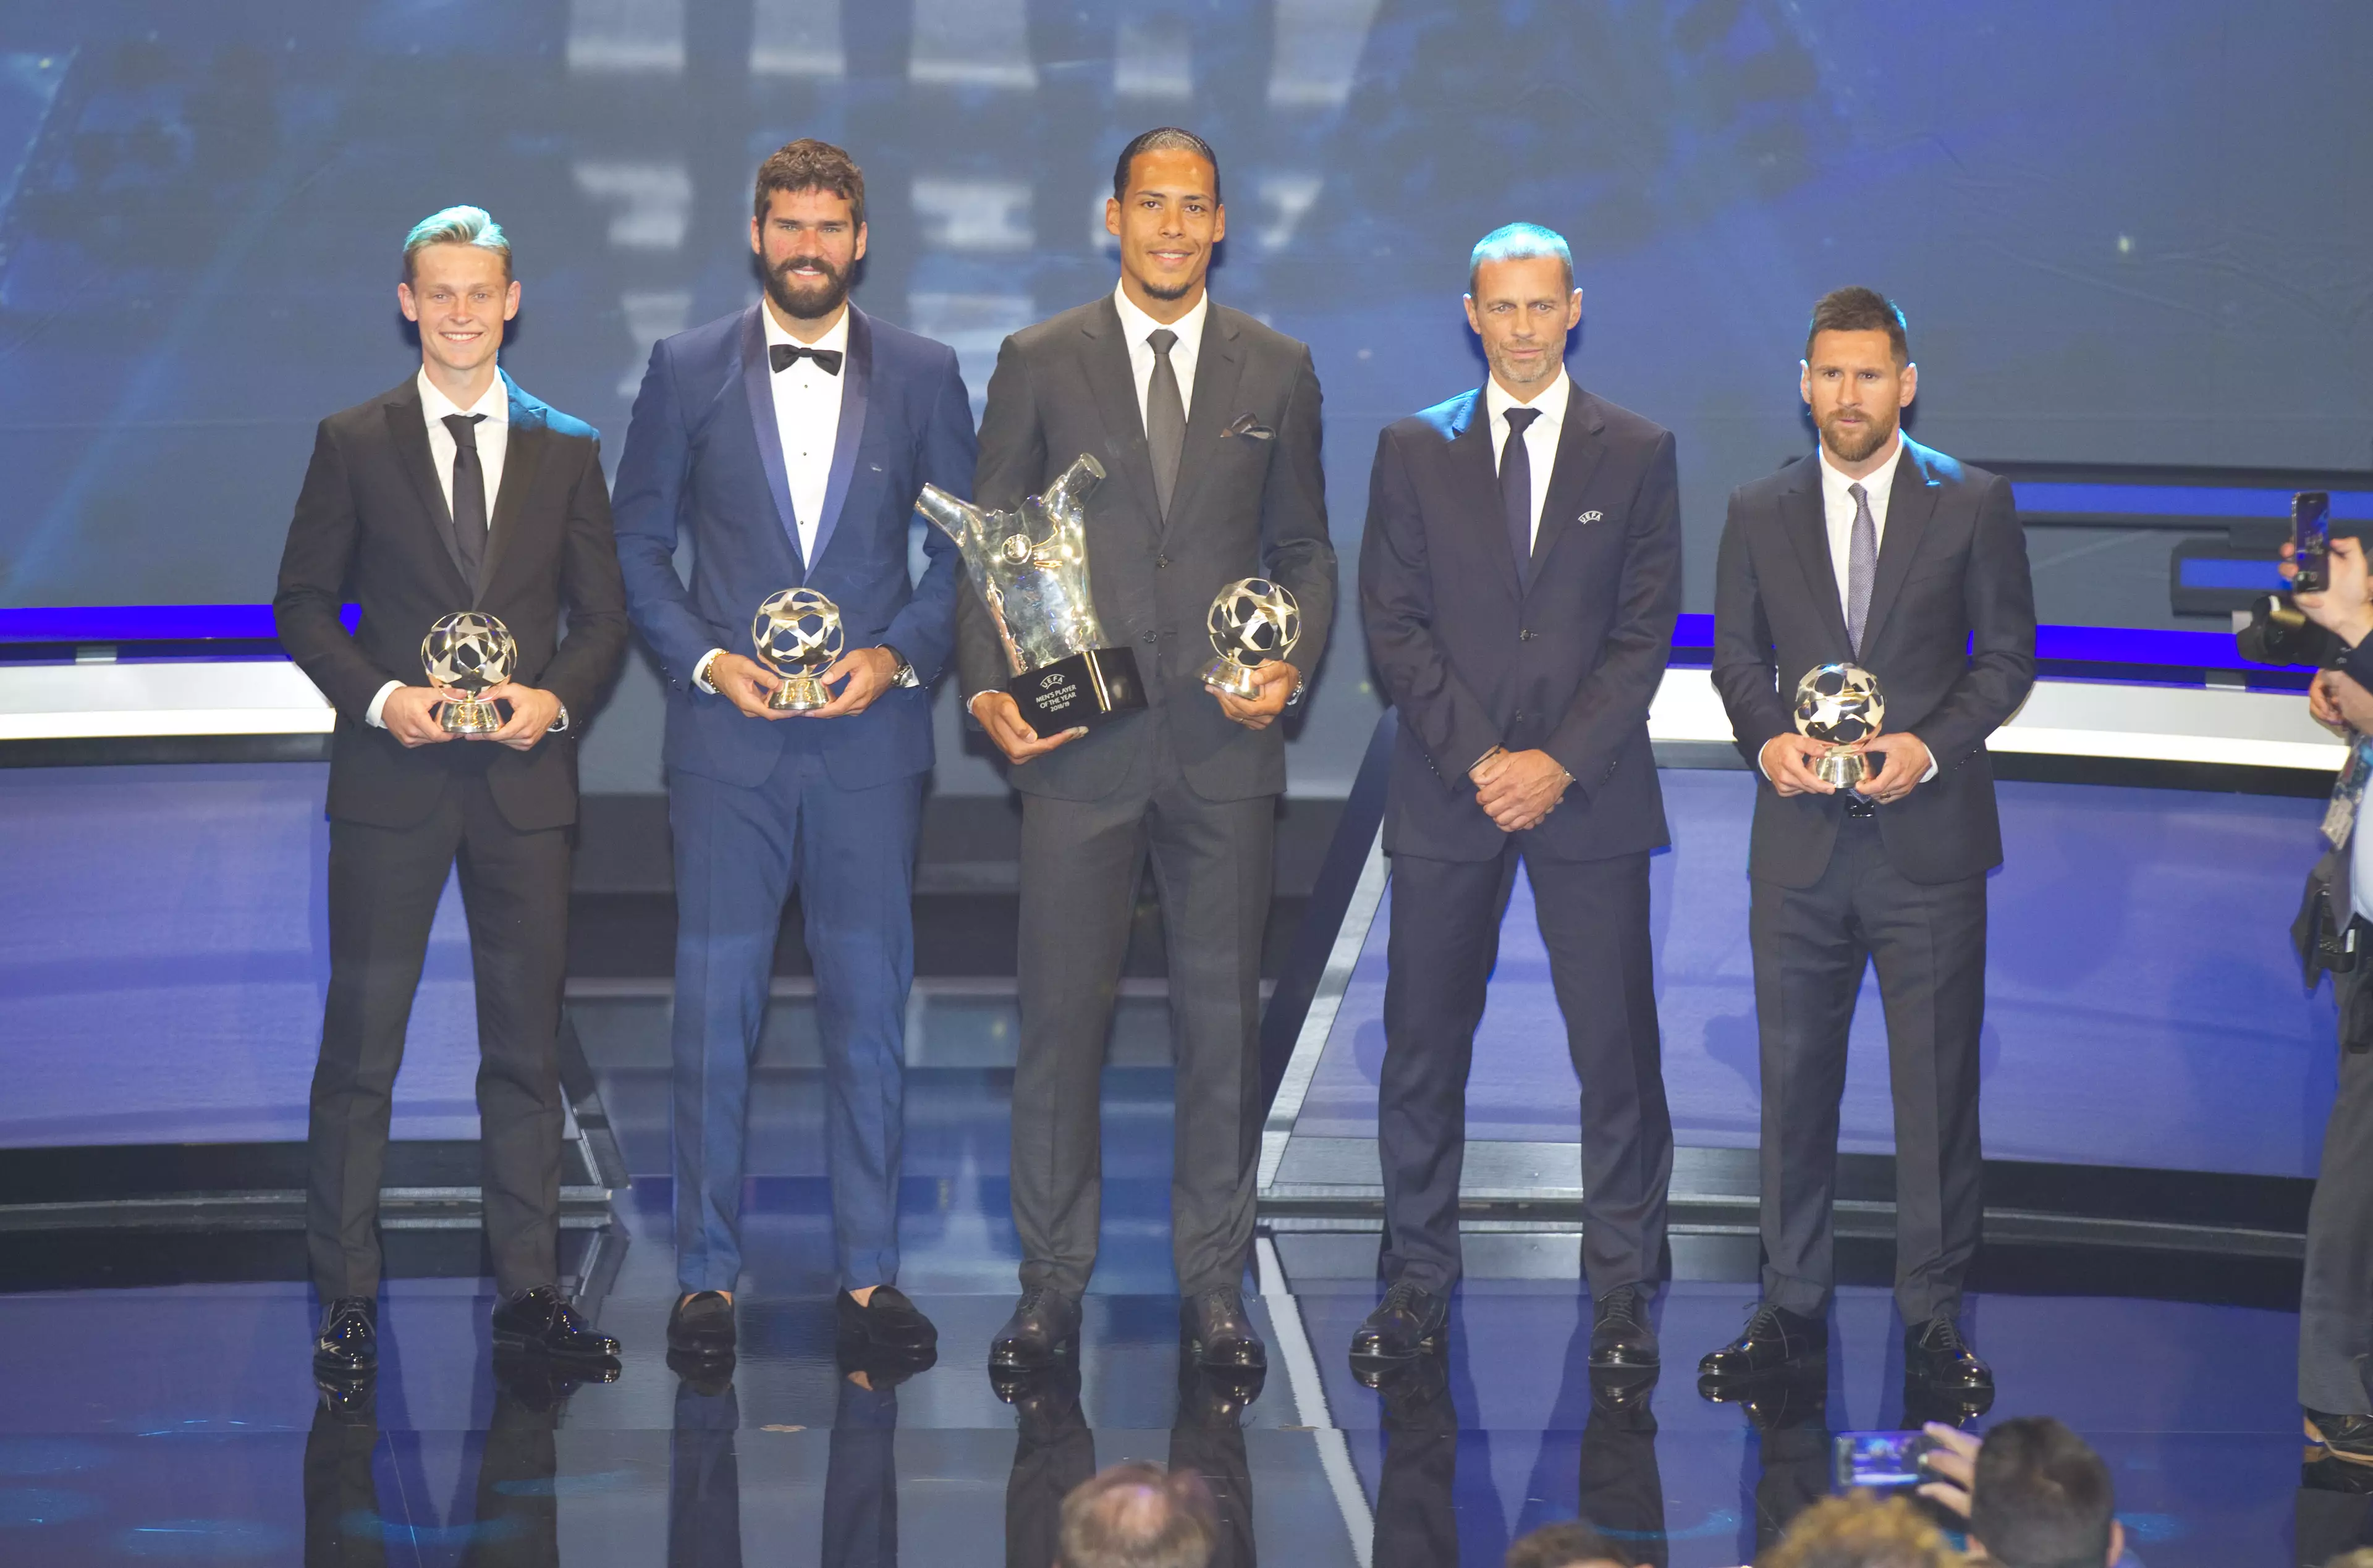 Virgil van Dijk won Player of the Year and Defender of the Year, while team-mate Allison was top goalkeeper, Frenkie De Jong was the best midfielder and Lionel Messi was No 1 forward